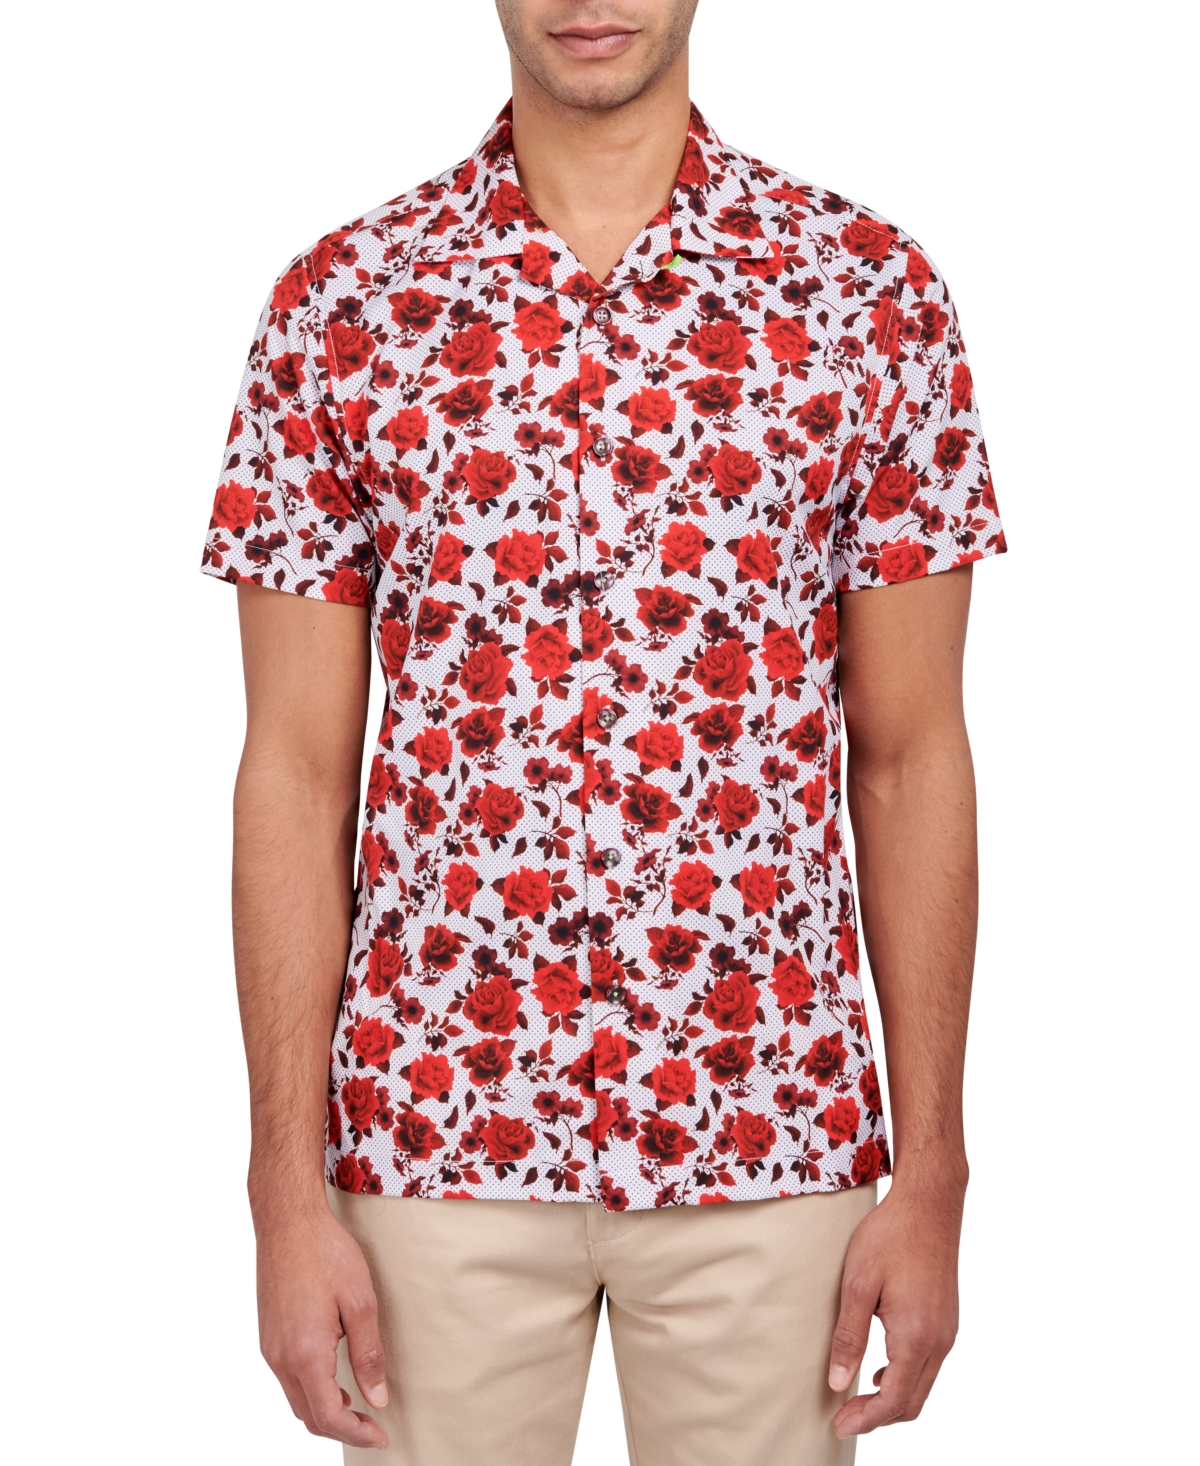 Men's Slim-Fit Non-Iron Performance Stretch Floral-Print Camp Shirt - Red